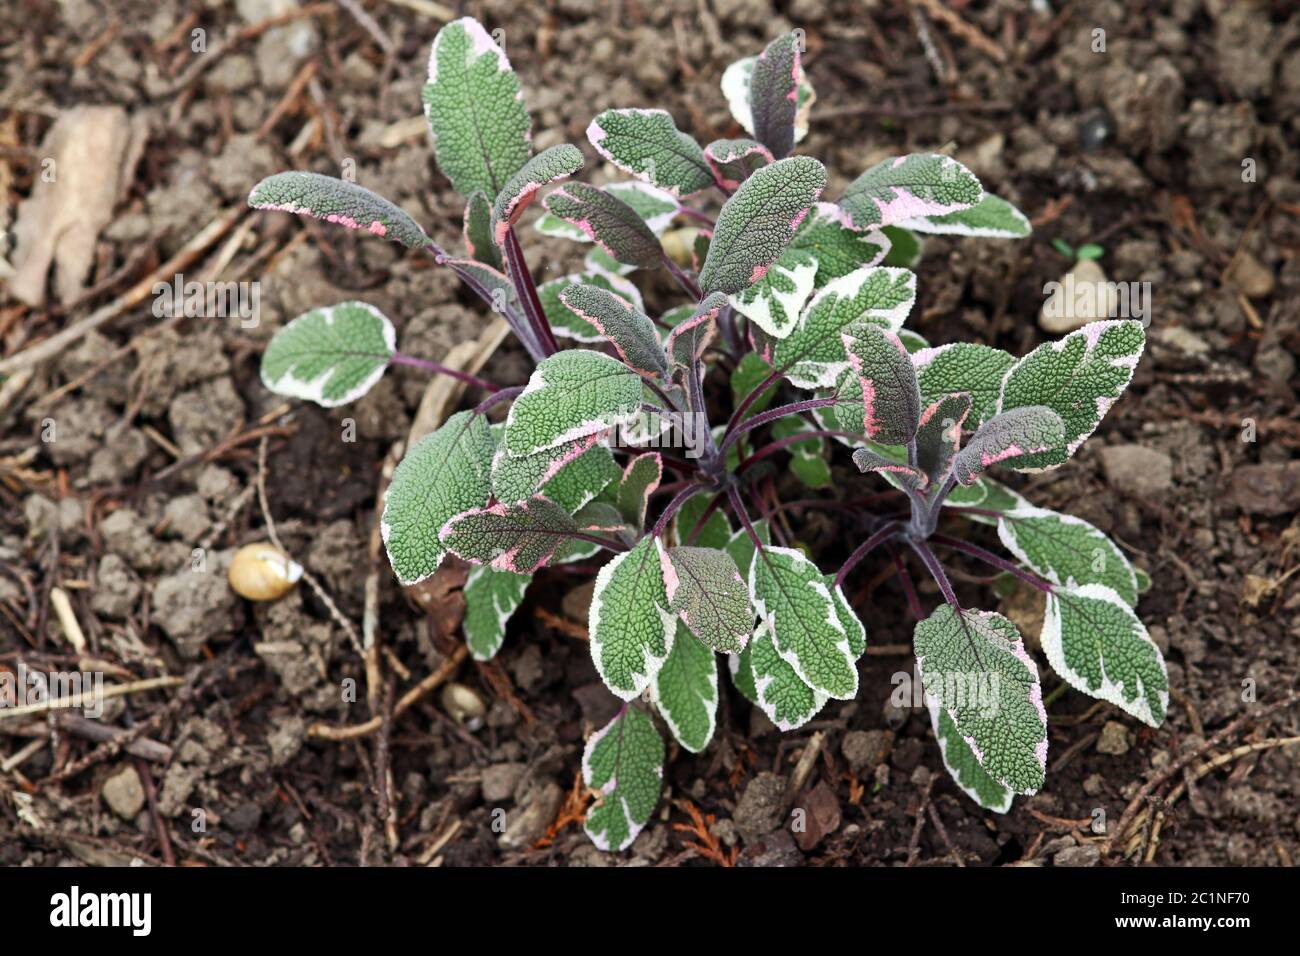 Tricoloured sage is beautiful and healthy Stock Photo